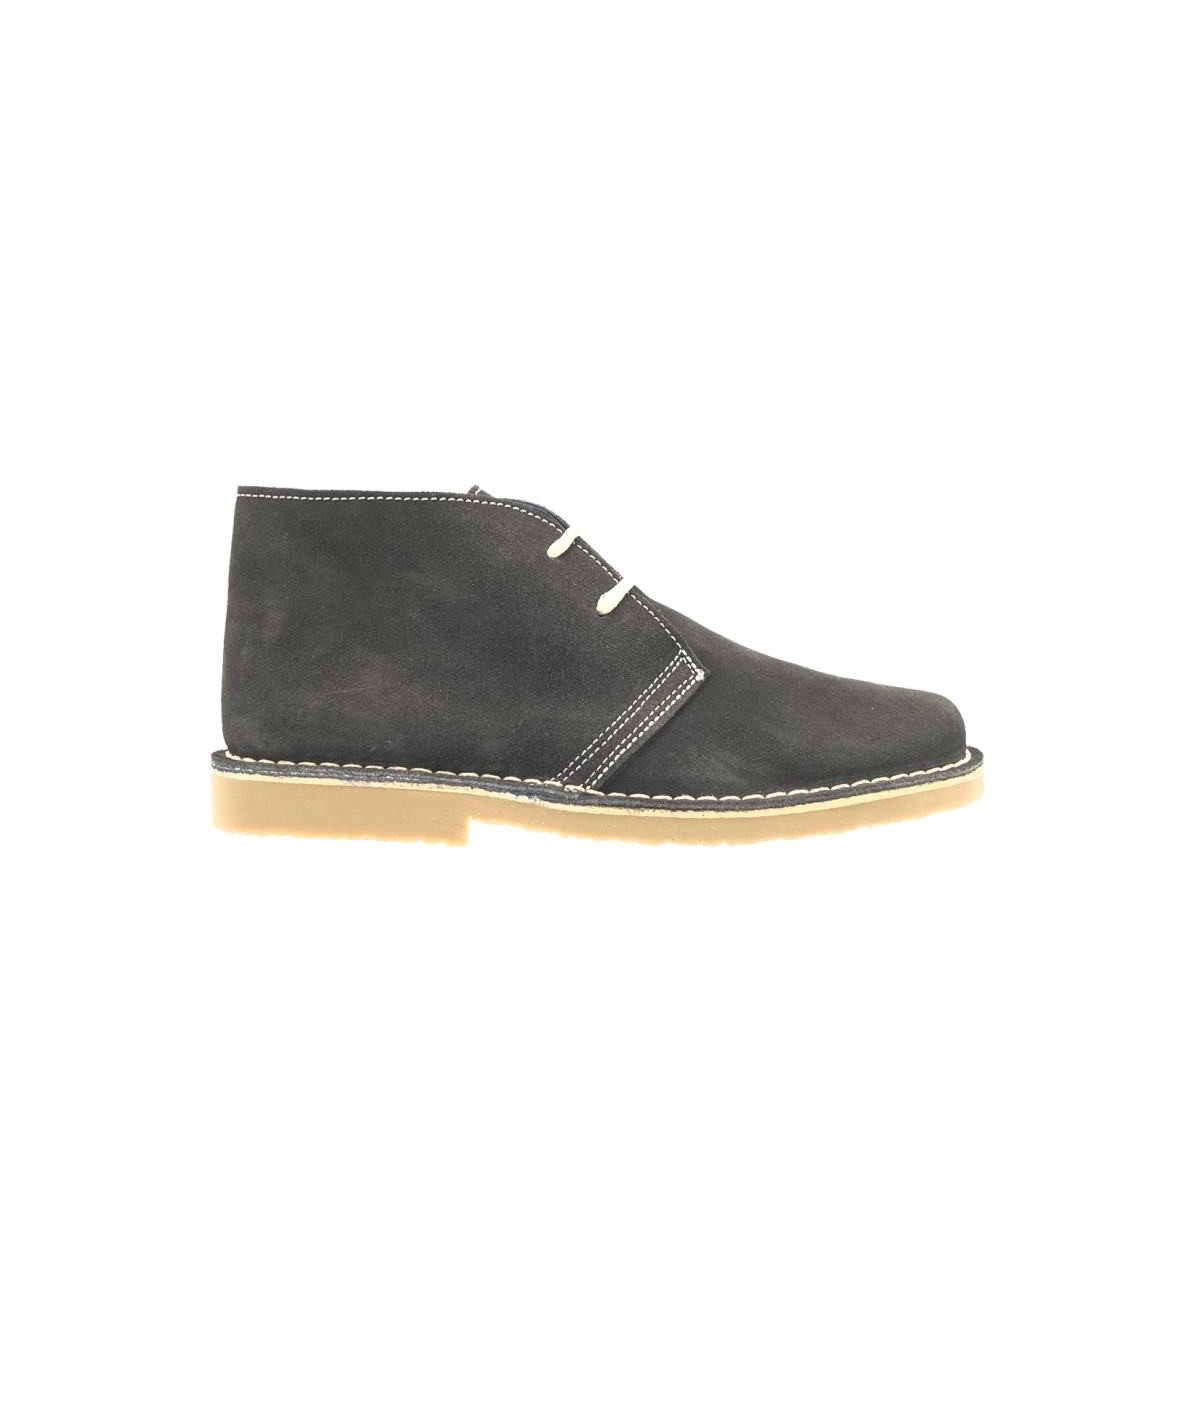 Desert boots in Gray color for men. They will become your favorites.